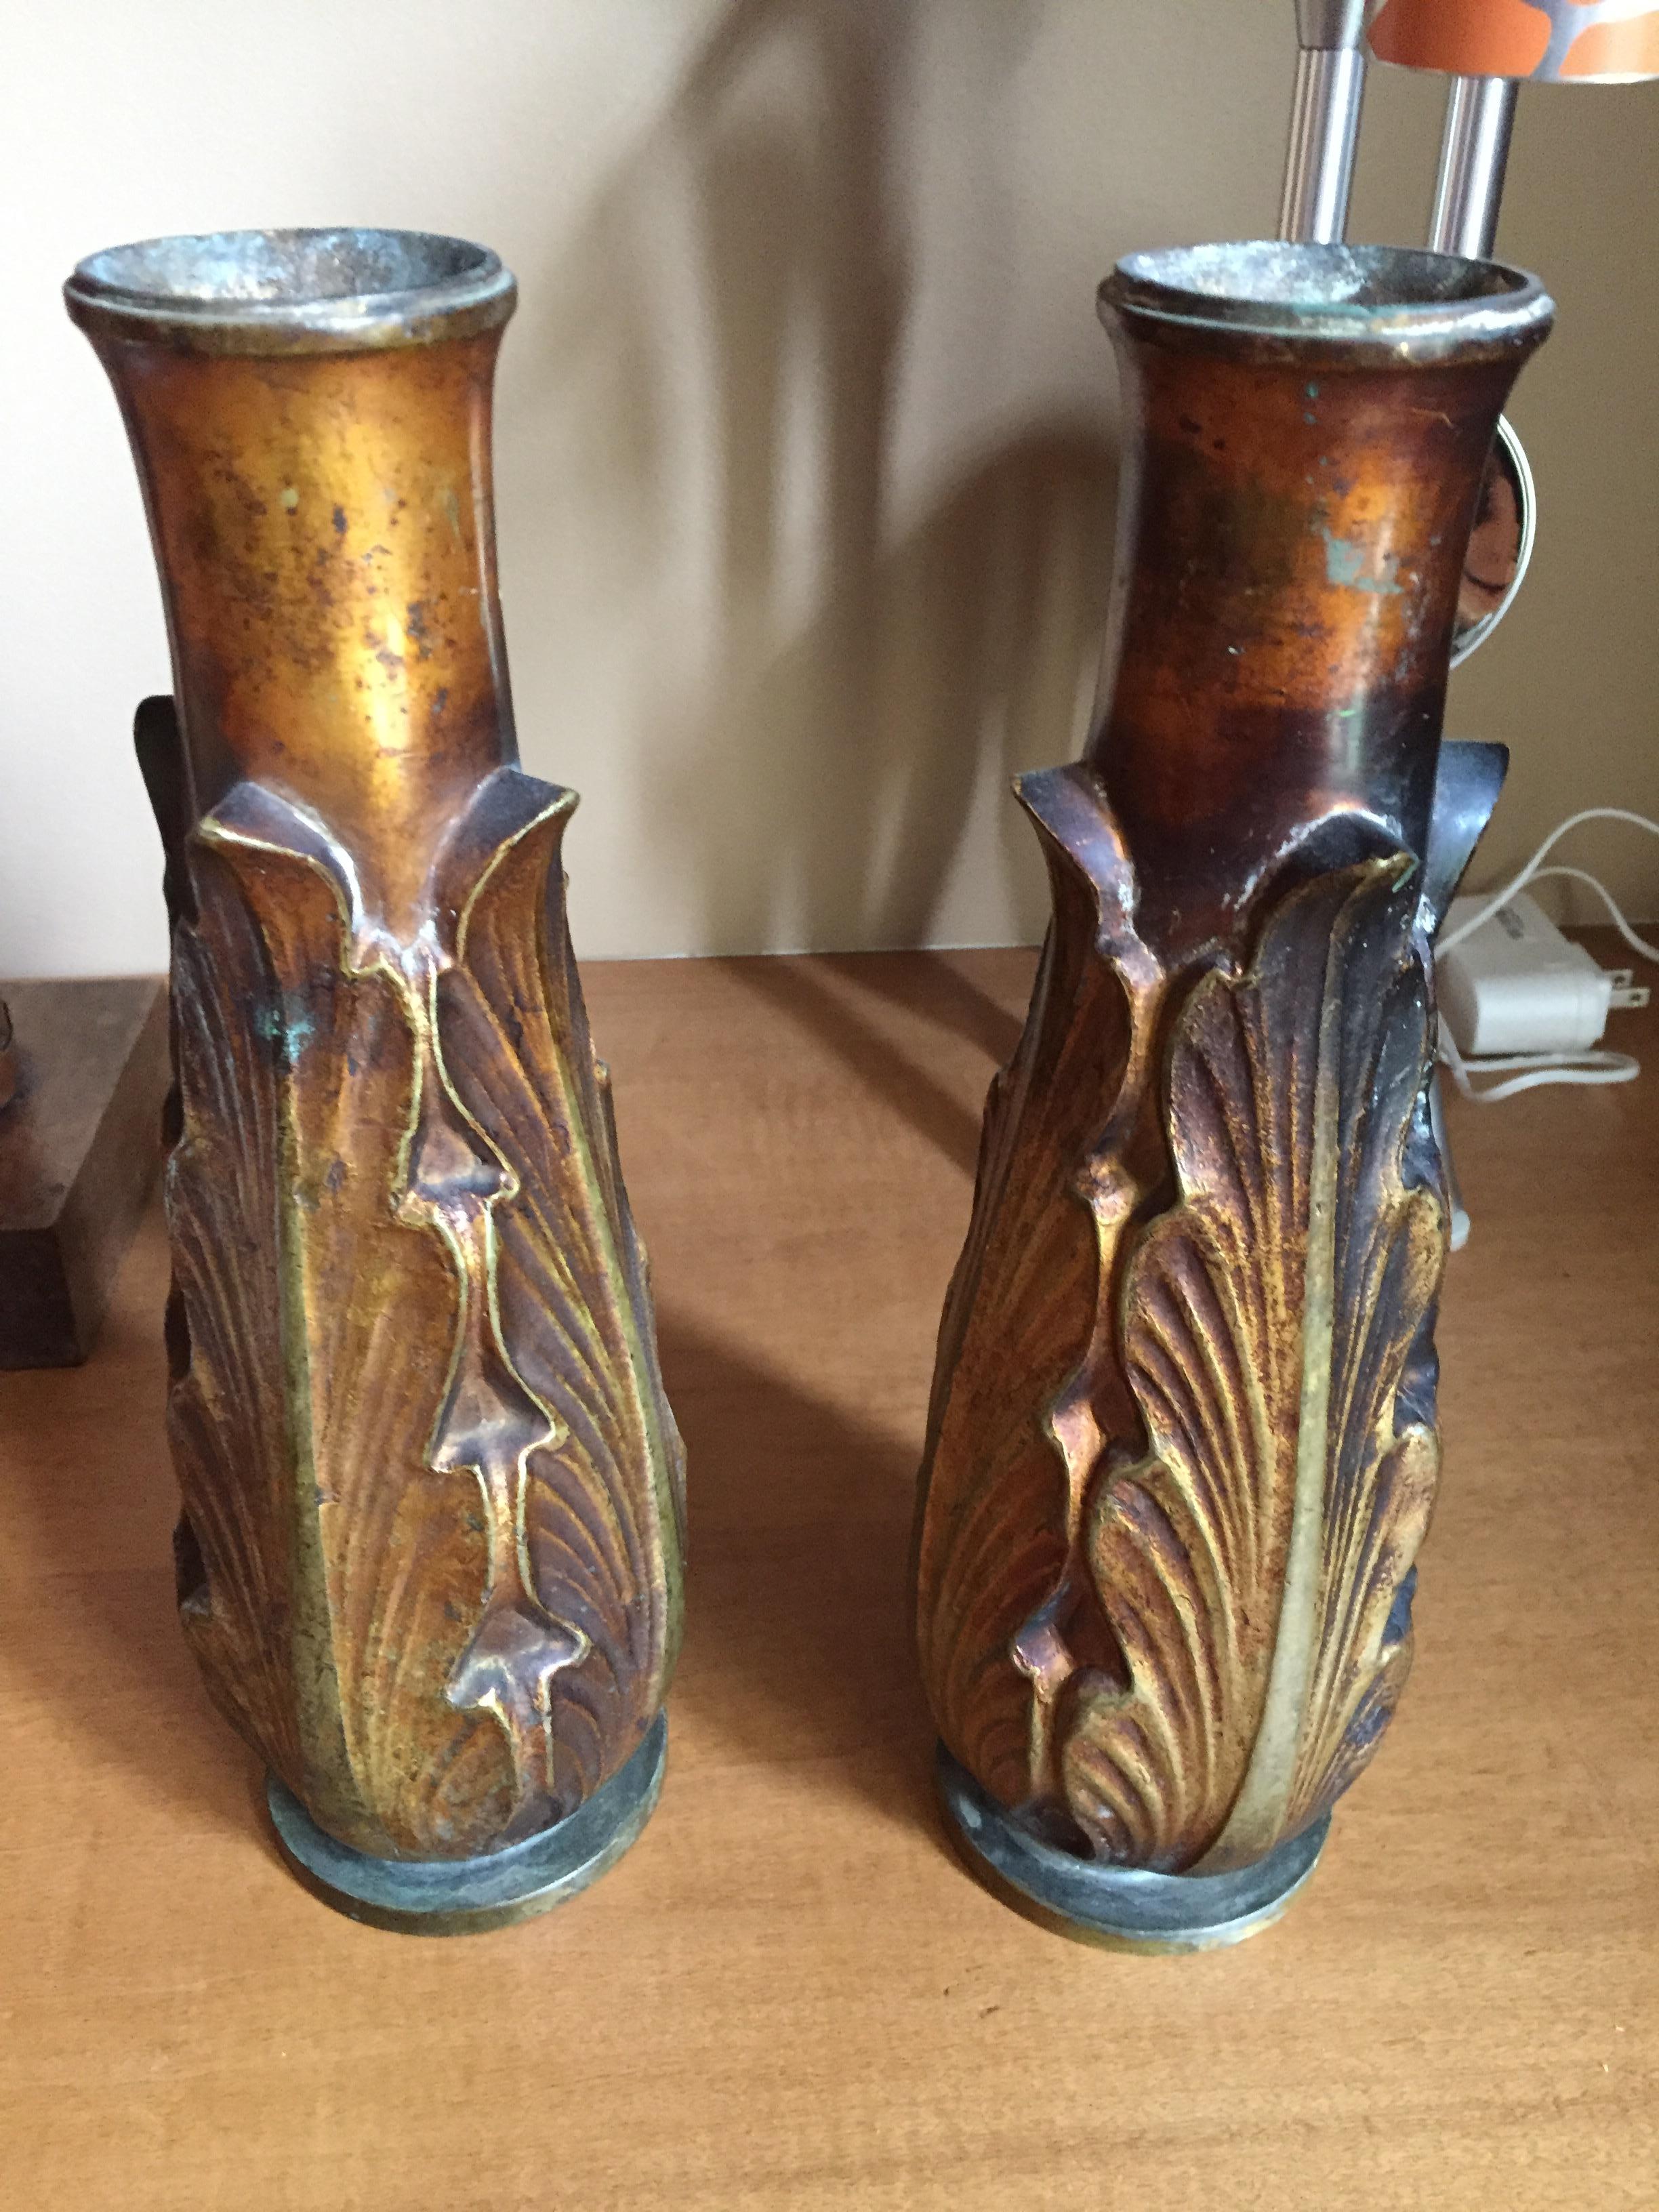 Vintage Art Deco bronze
beautiful natural patina
3lbs each; substantial pieces
beautiful leaf pattern
use as a set of vases, or for large candles,
or put on display as the beautiful work of art they are!